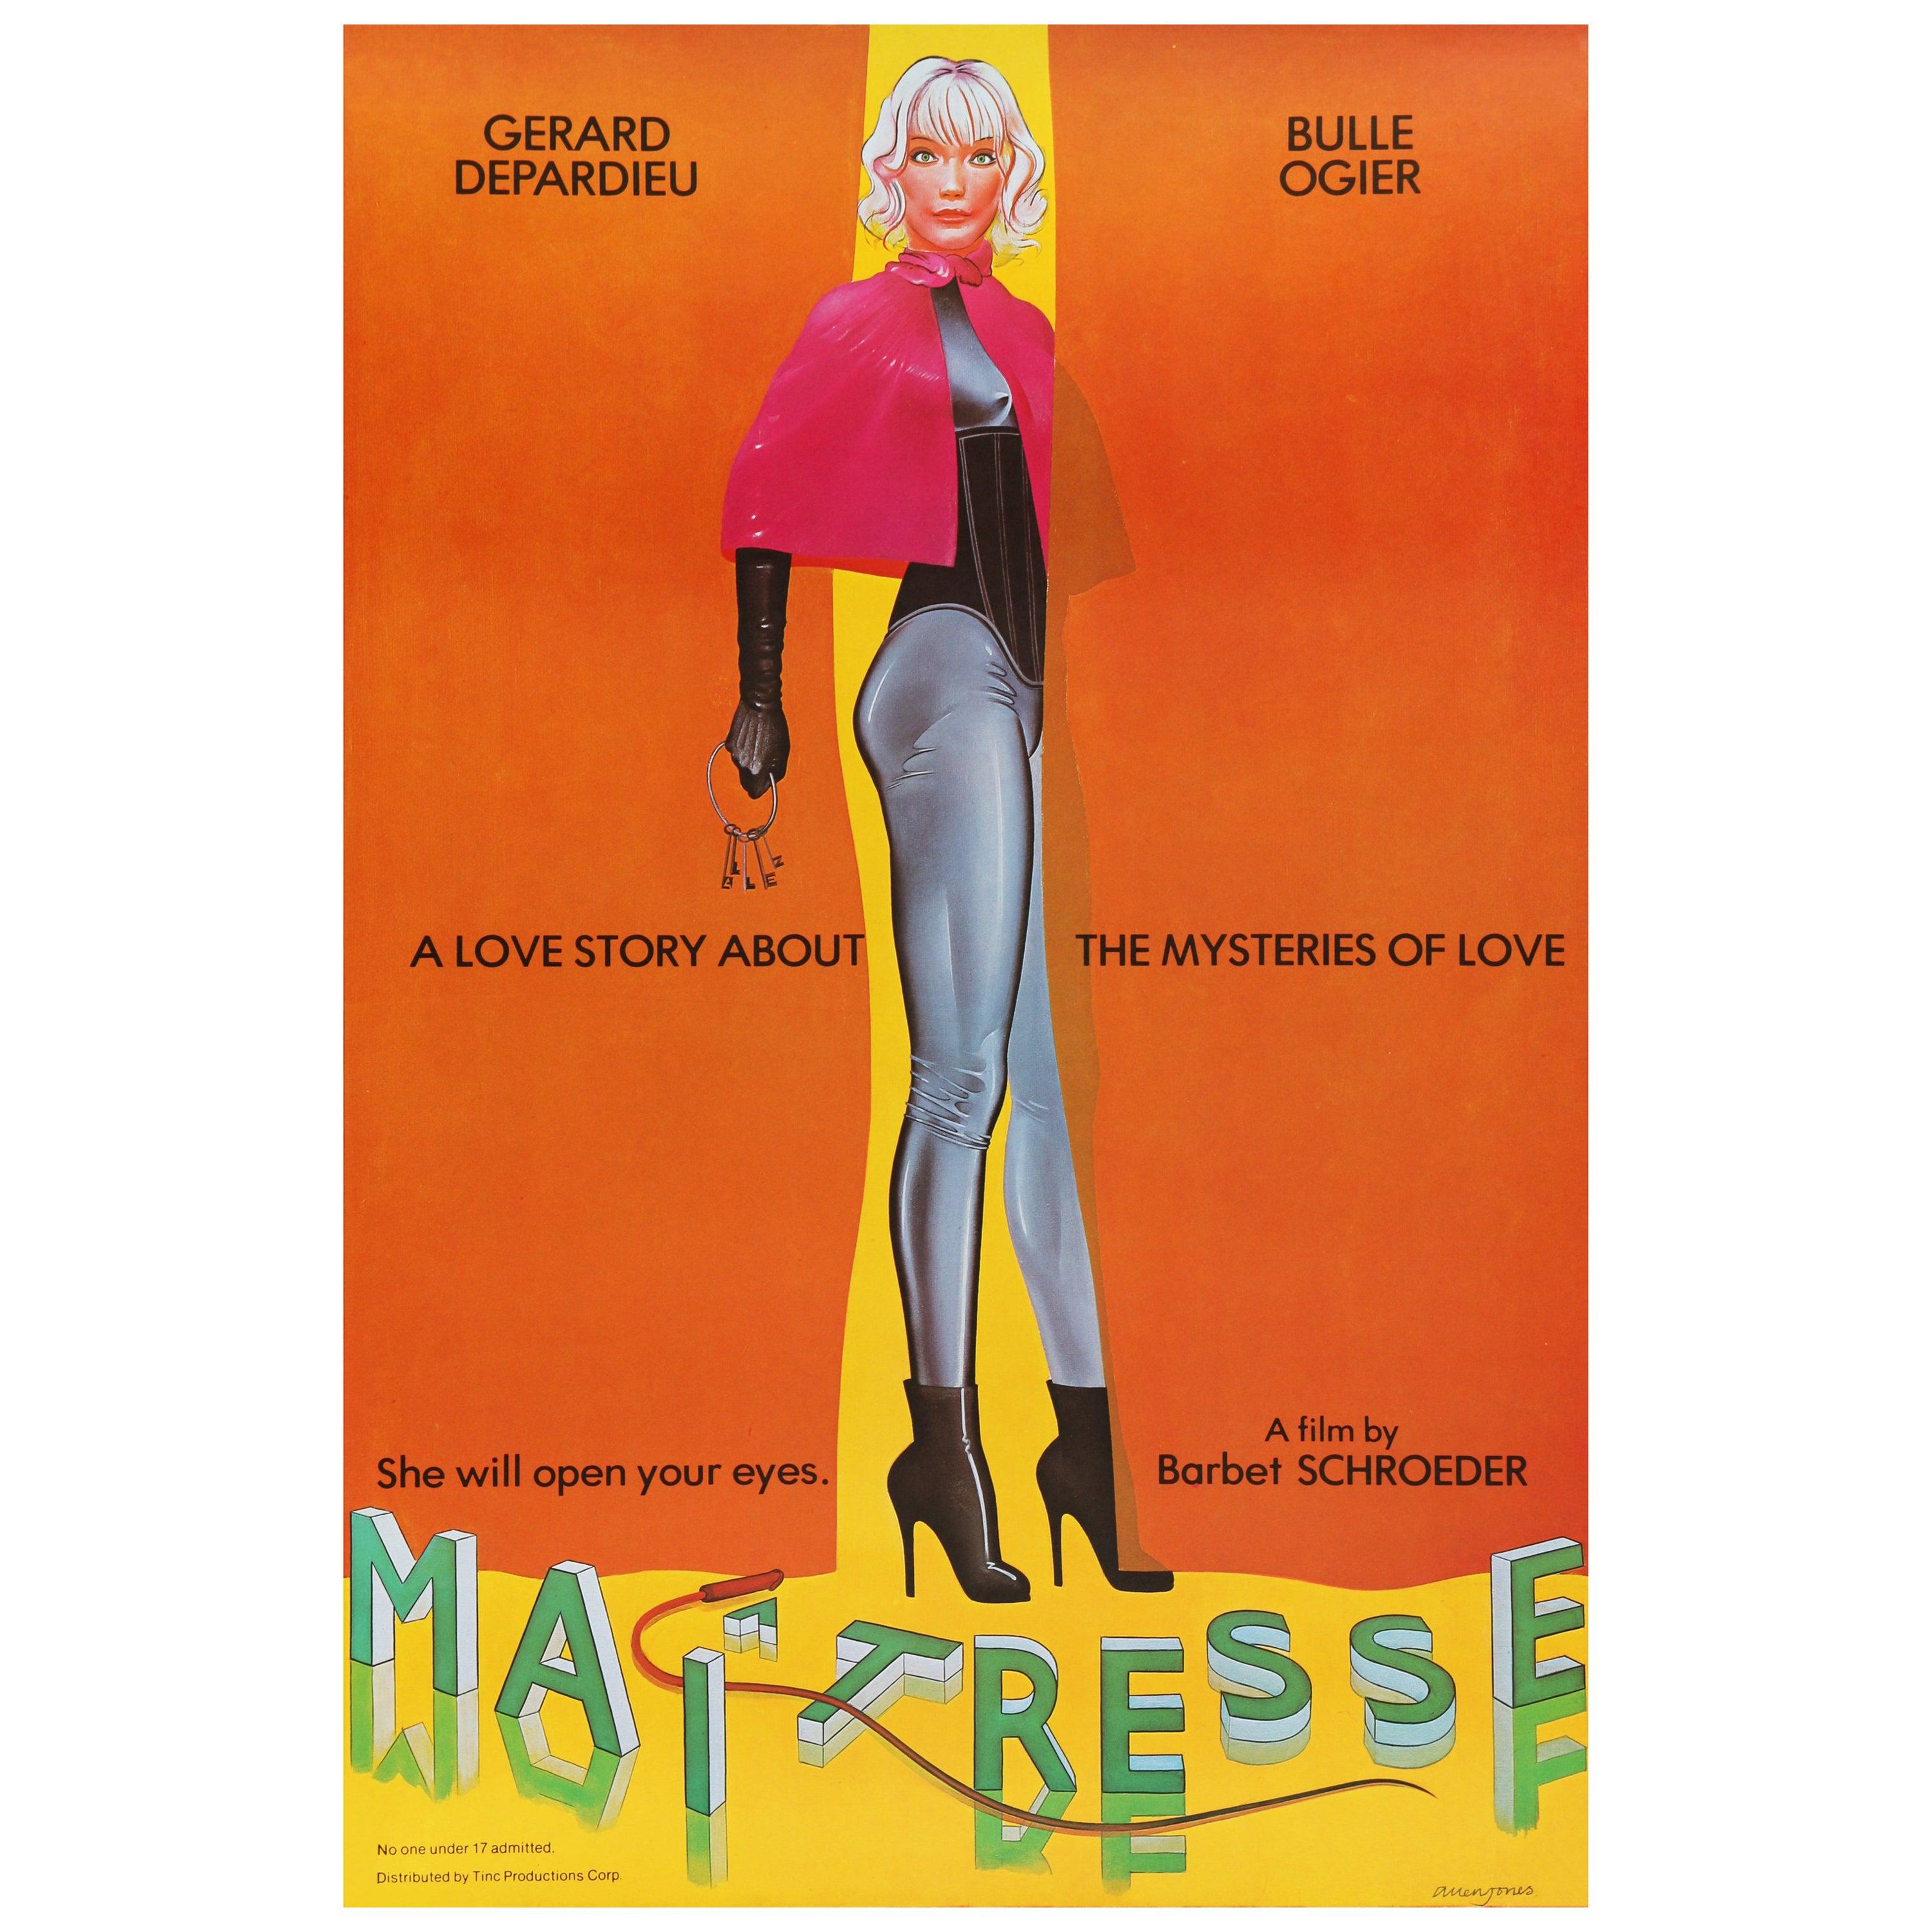 In an early commercial commission, renowned British Pop Artist Allen Jones was asked to design the publicity poster for the 1976 US release of Barbet Schroeder’s 1973 fetish romance 'Maîtresse,' starring a young Gerard Depardieu as the small time